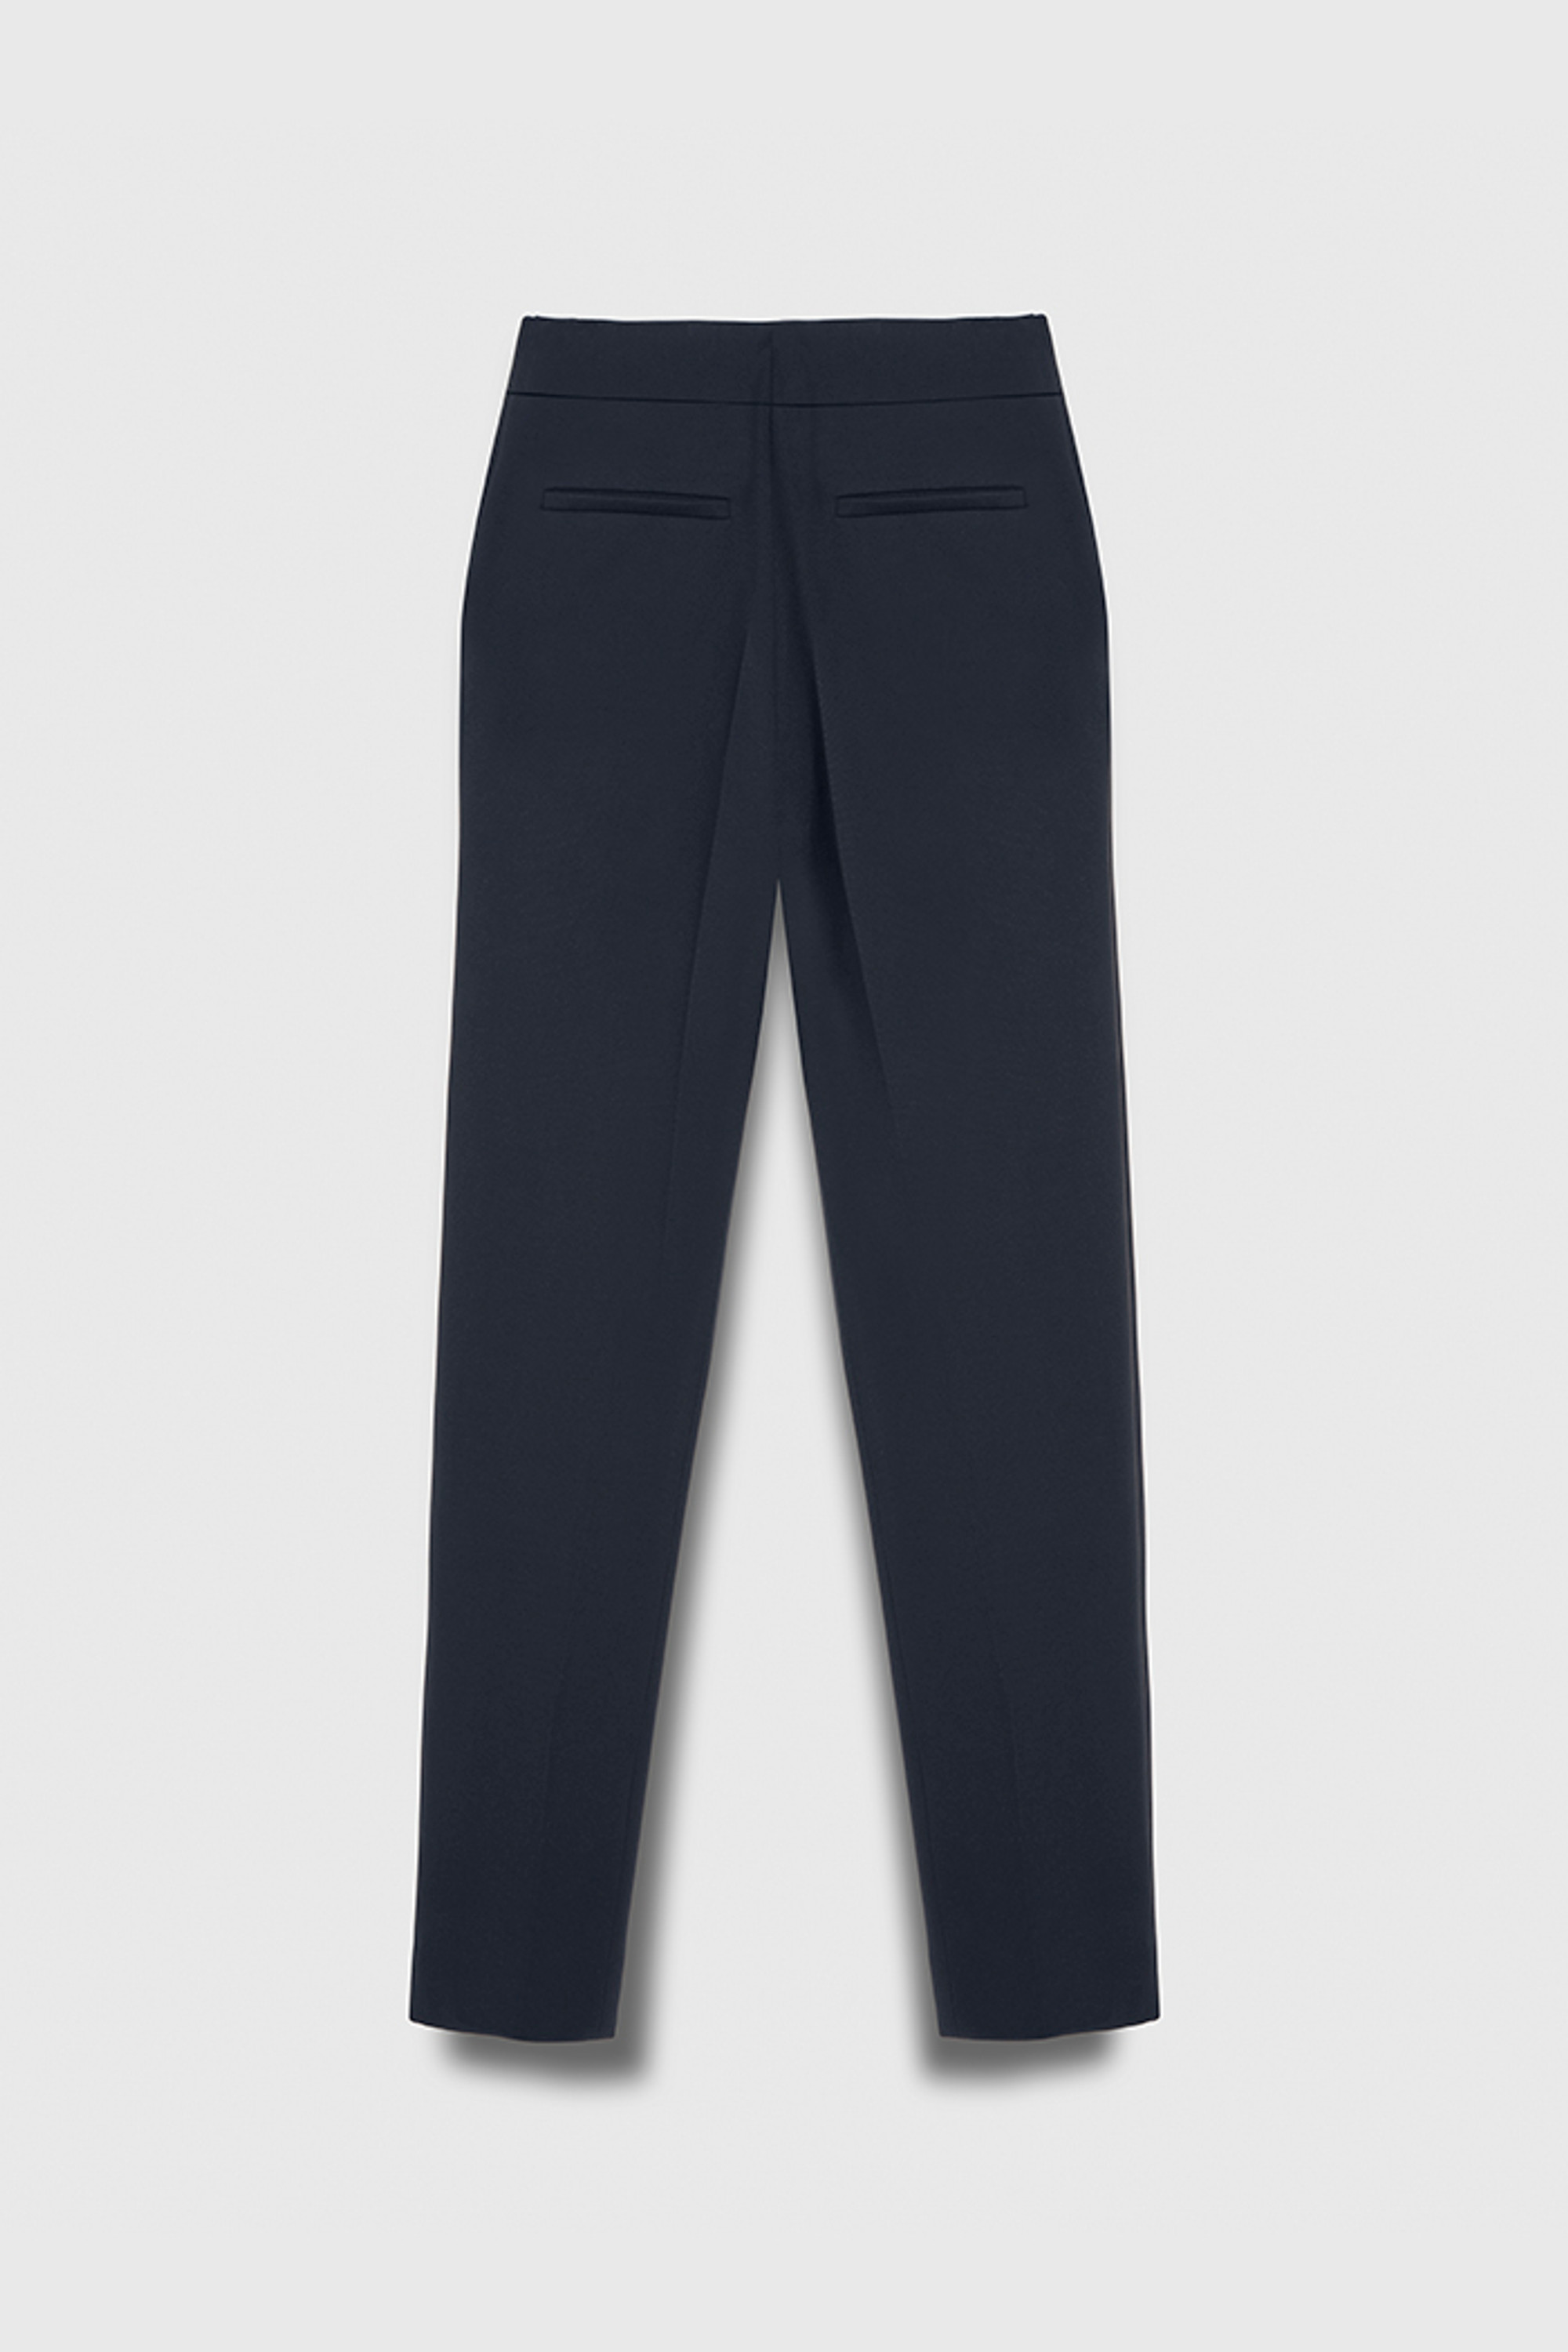 Trousers - Clothing | Shop Women's Trousers | Fashion Style Guide